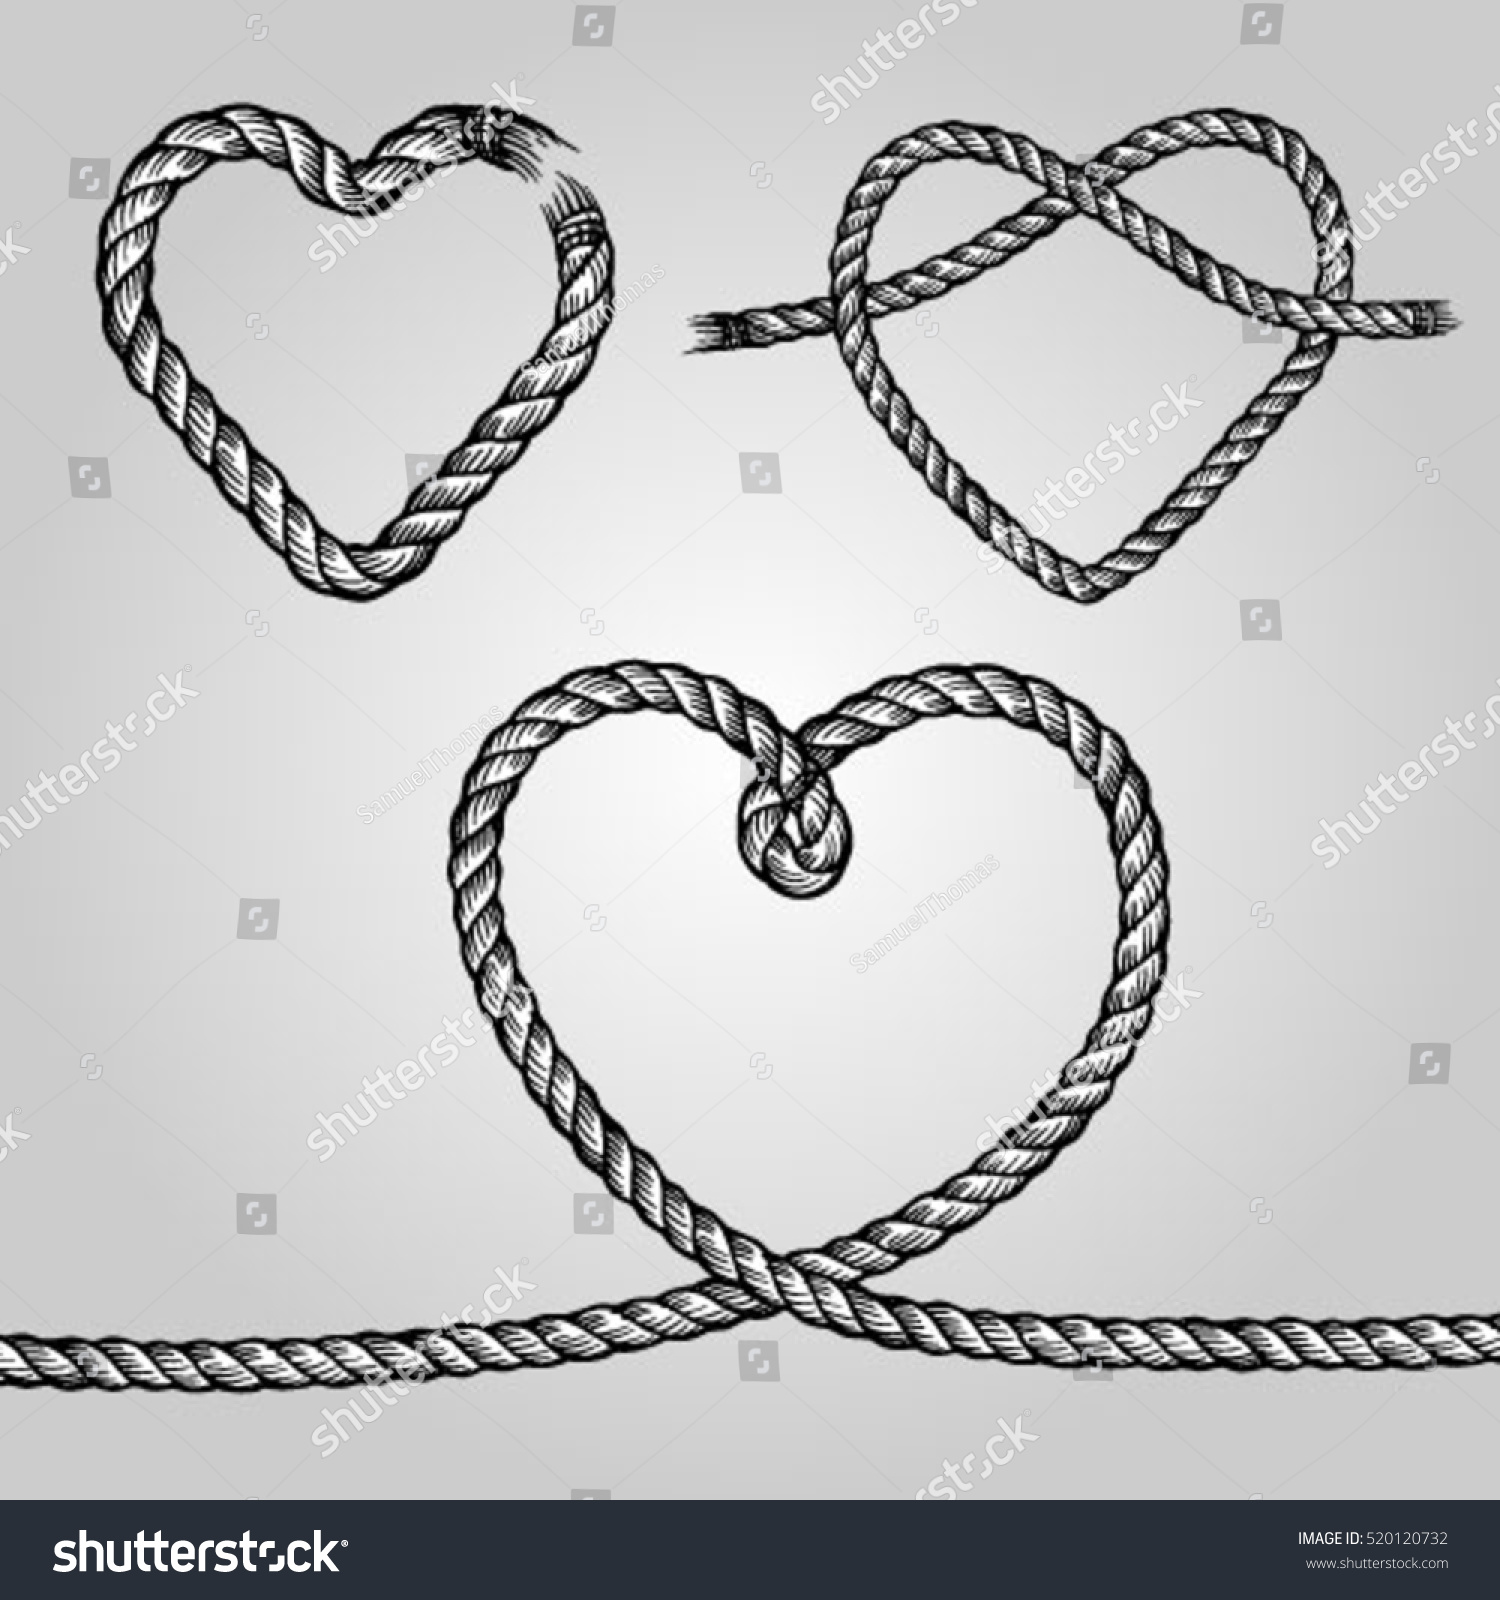 Set Rope Hearts Decorative Rope Heart Stock Vector 520120732 - Shutterstock